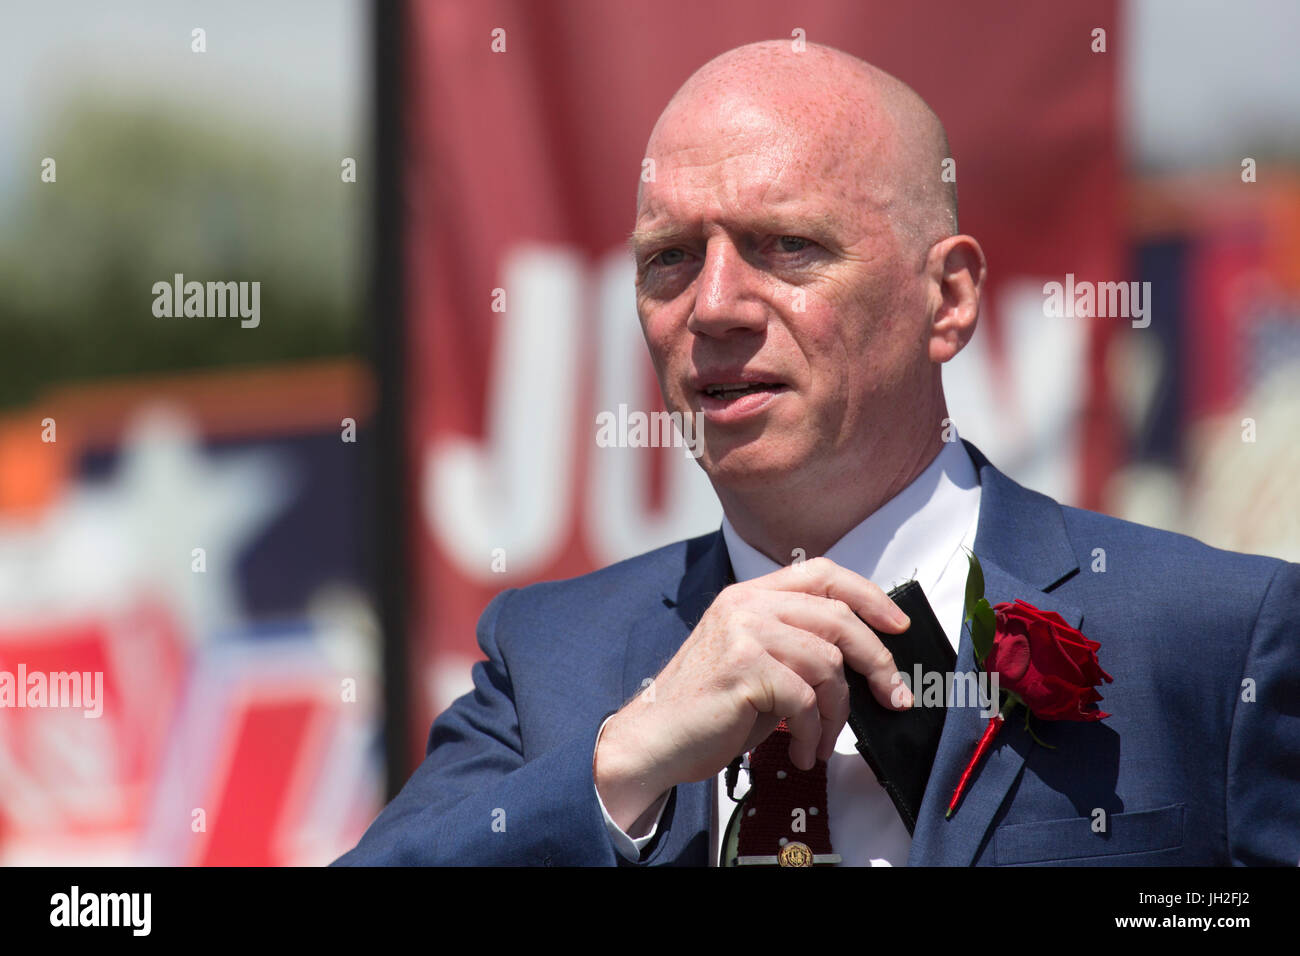 Matt Wrack, General Secretary of the Fire Brigades Union, at the Durham Miners' Gala at Durham City, England. The 133rd Gala attracted 200,000 people  Stock Photo